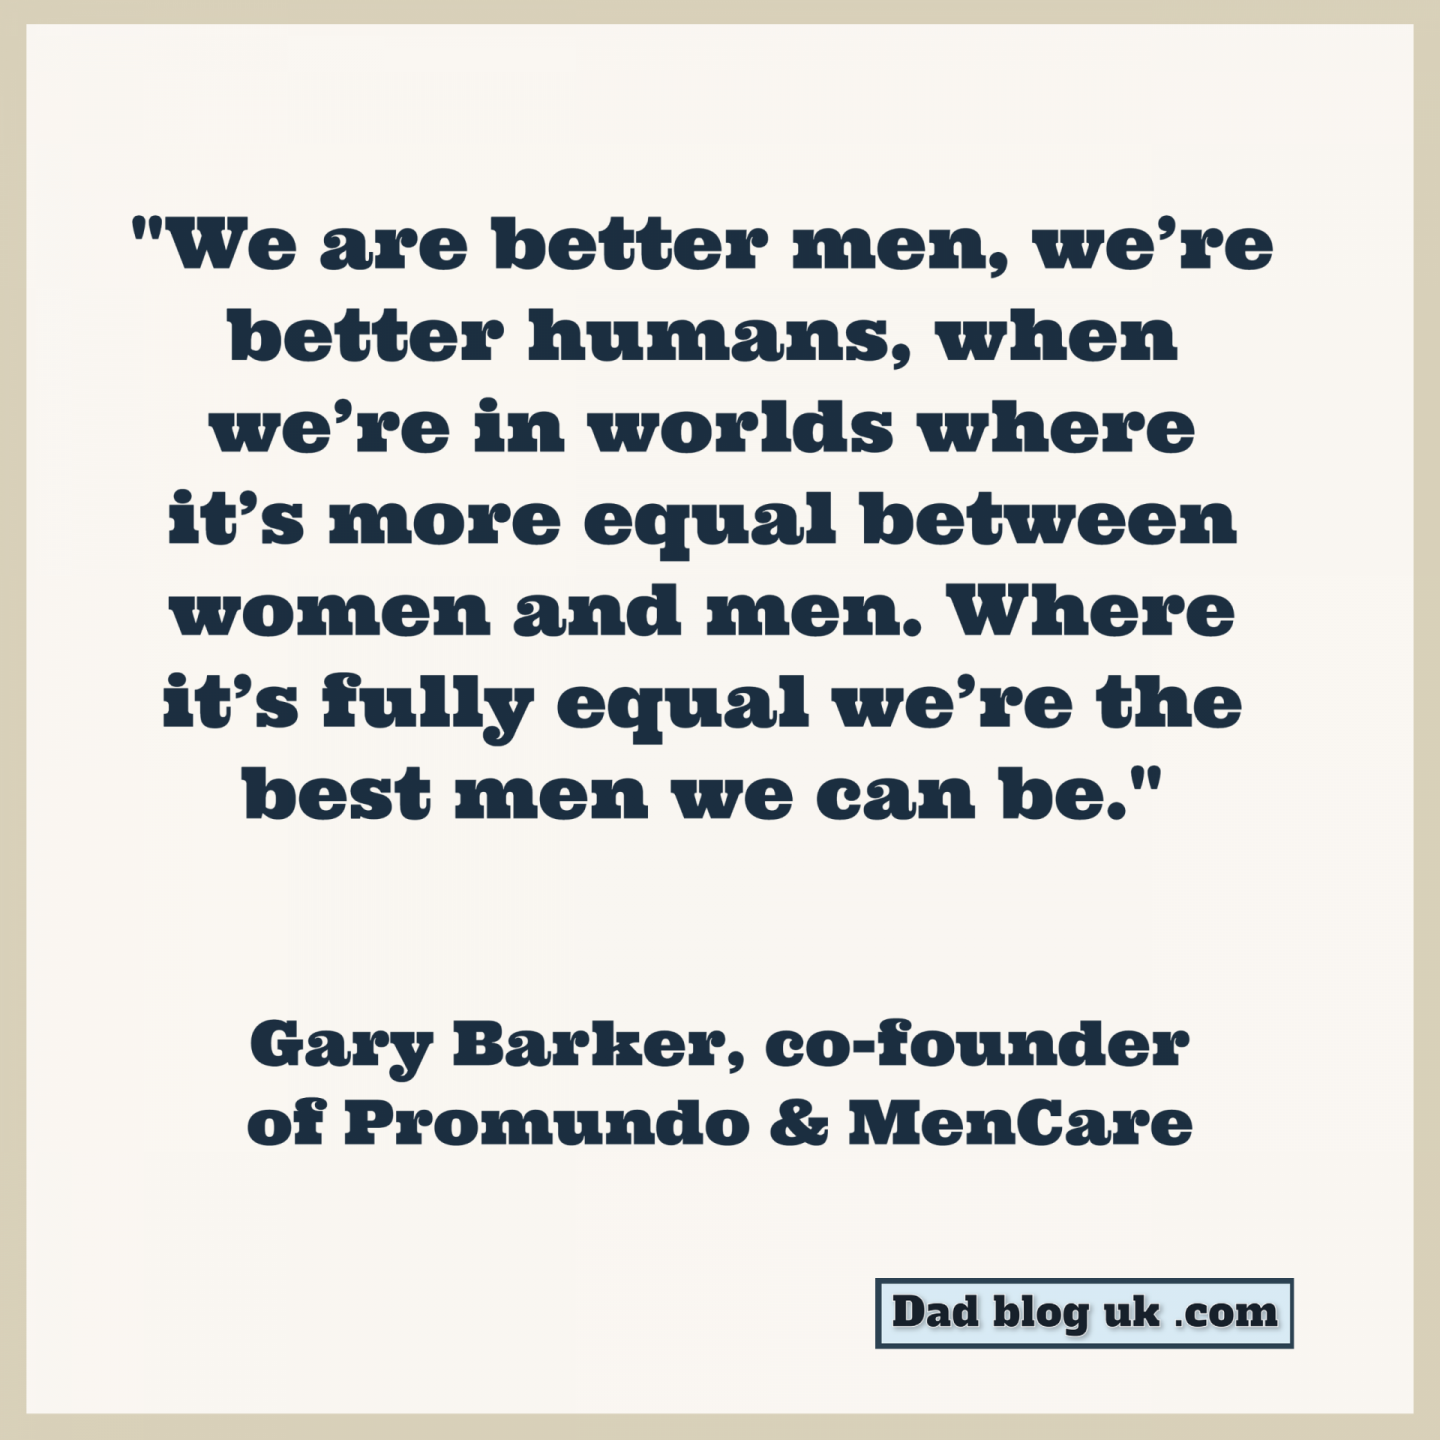 Quote from Gary Barker of Prmundo and Mencare